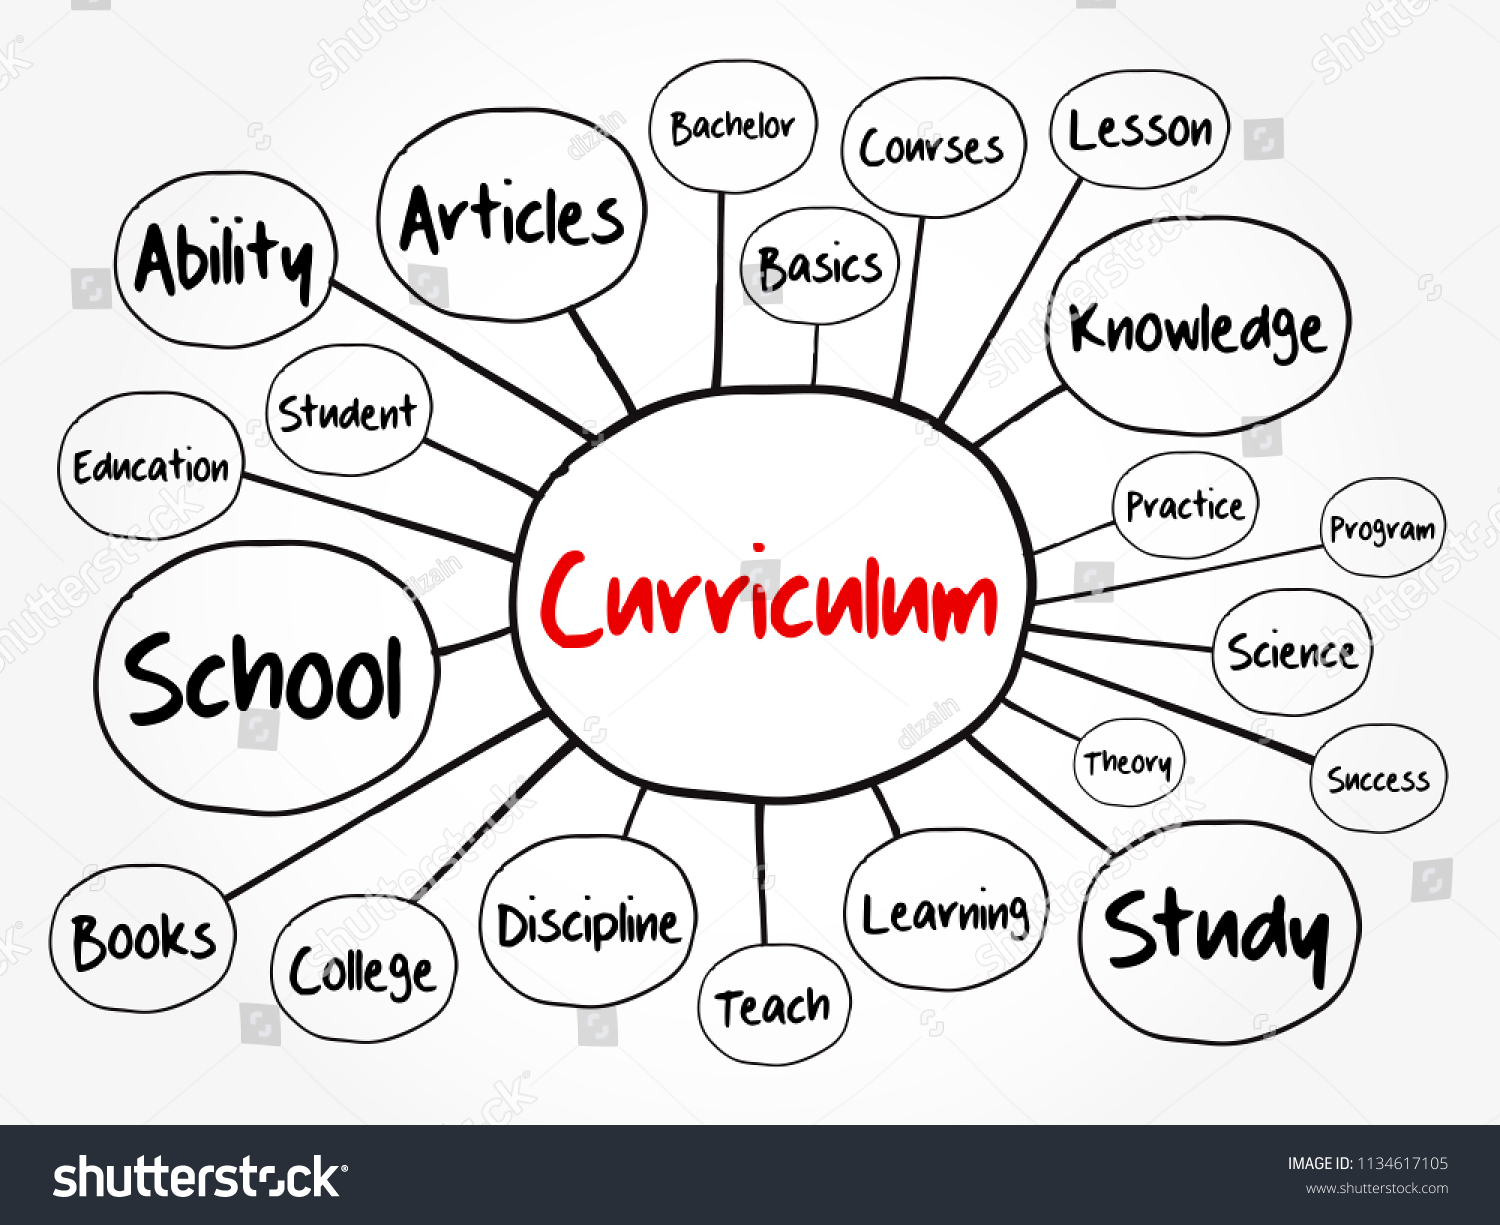 Curriculum Mind Map Flowchart Education Concept Royalty Free Stock